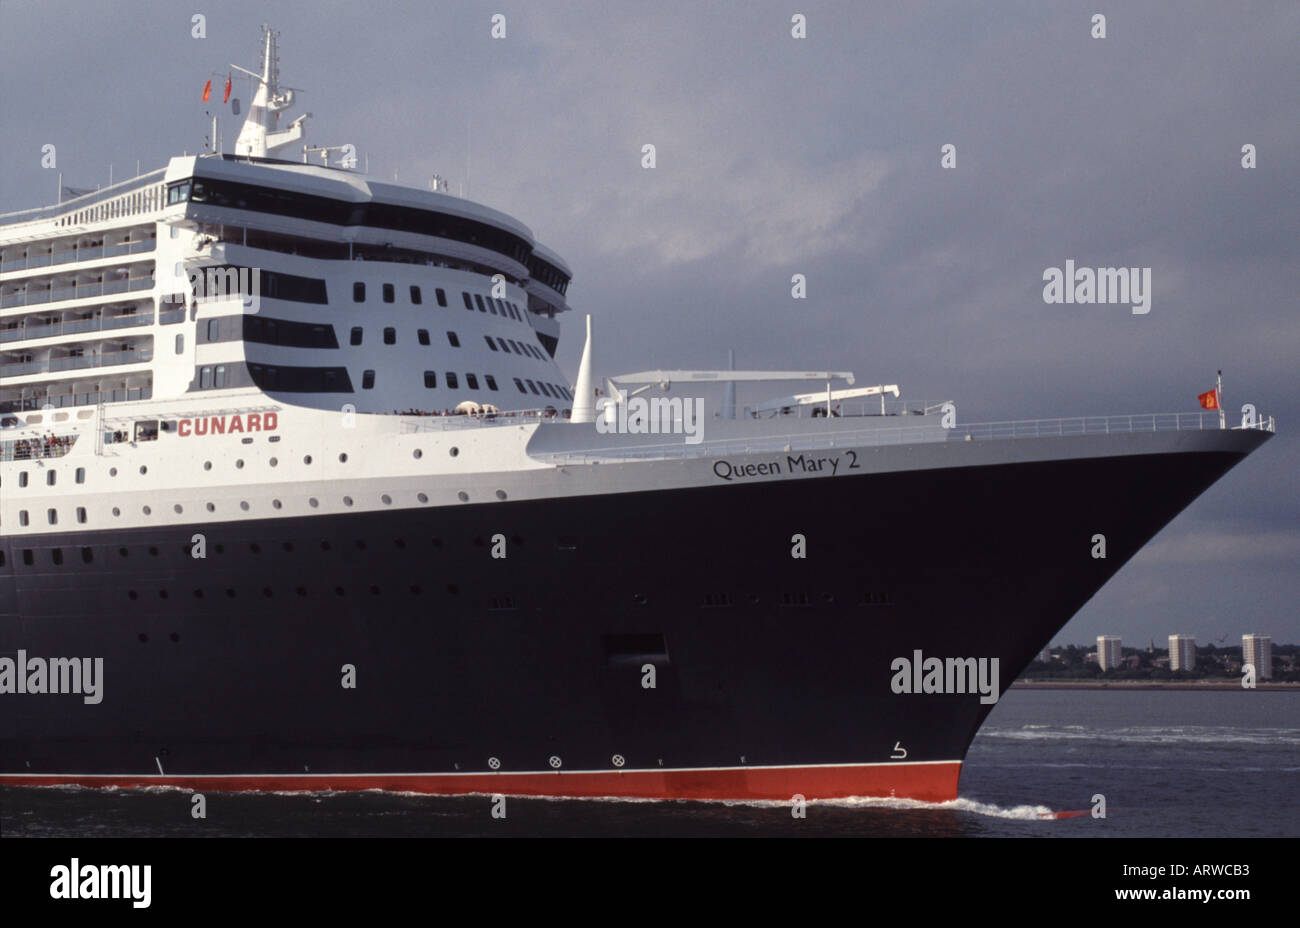 New Cunard cruise liner Queen Mary 2 approaching Southampton Stock Photo